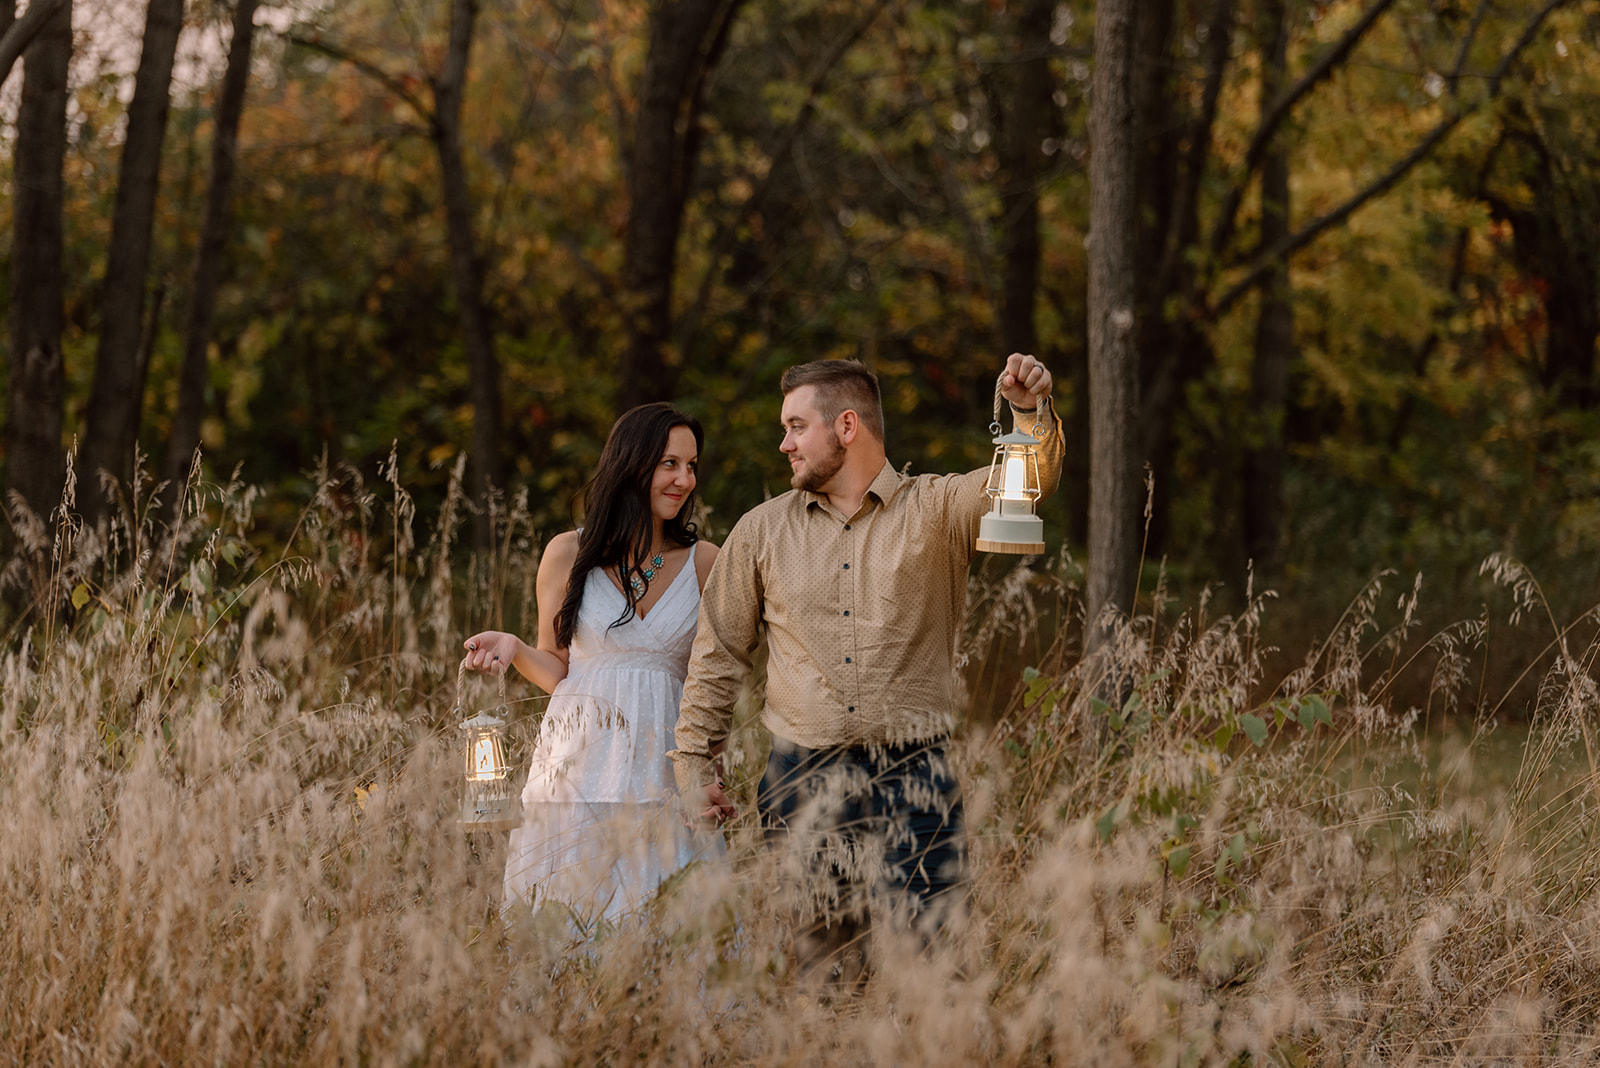 Couple holding lanterns looks at each other in the dusk while standing in tall grass